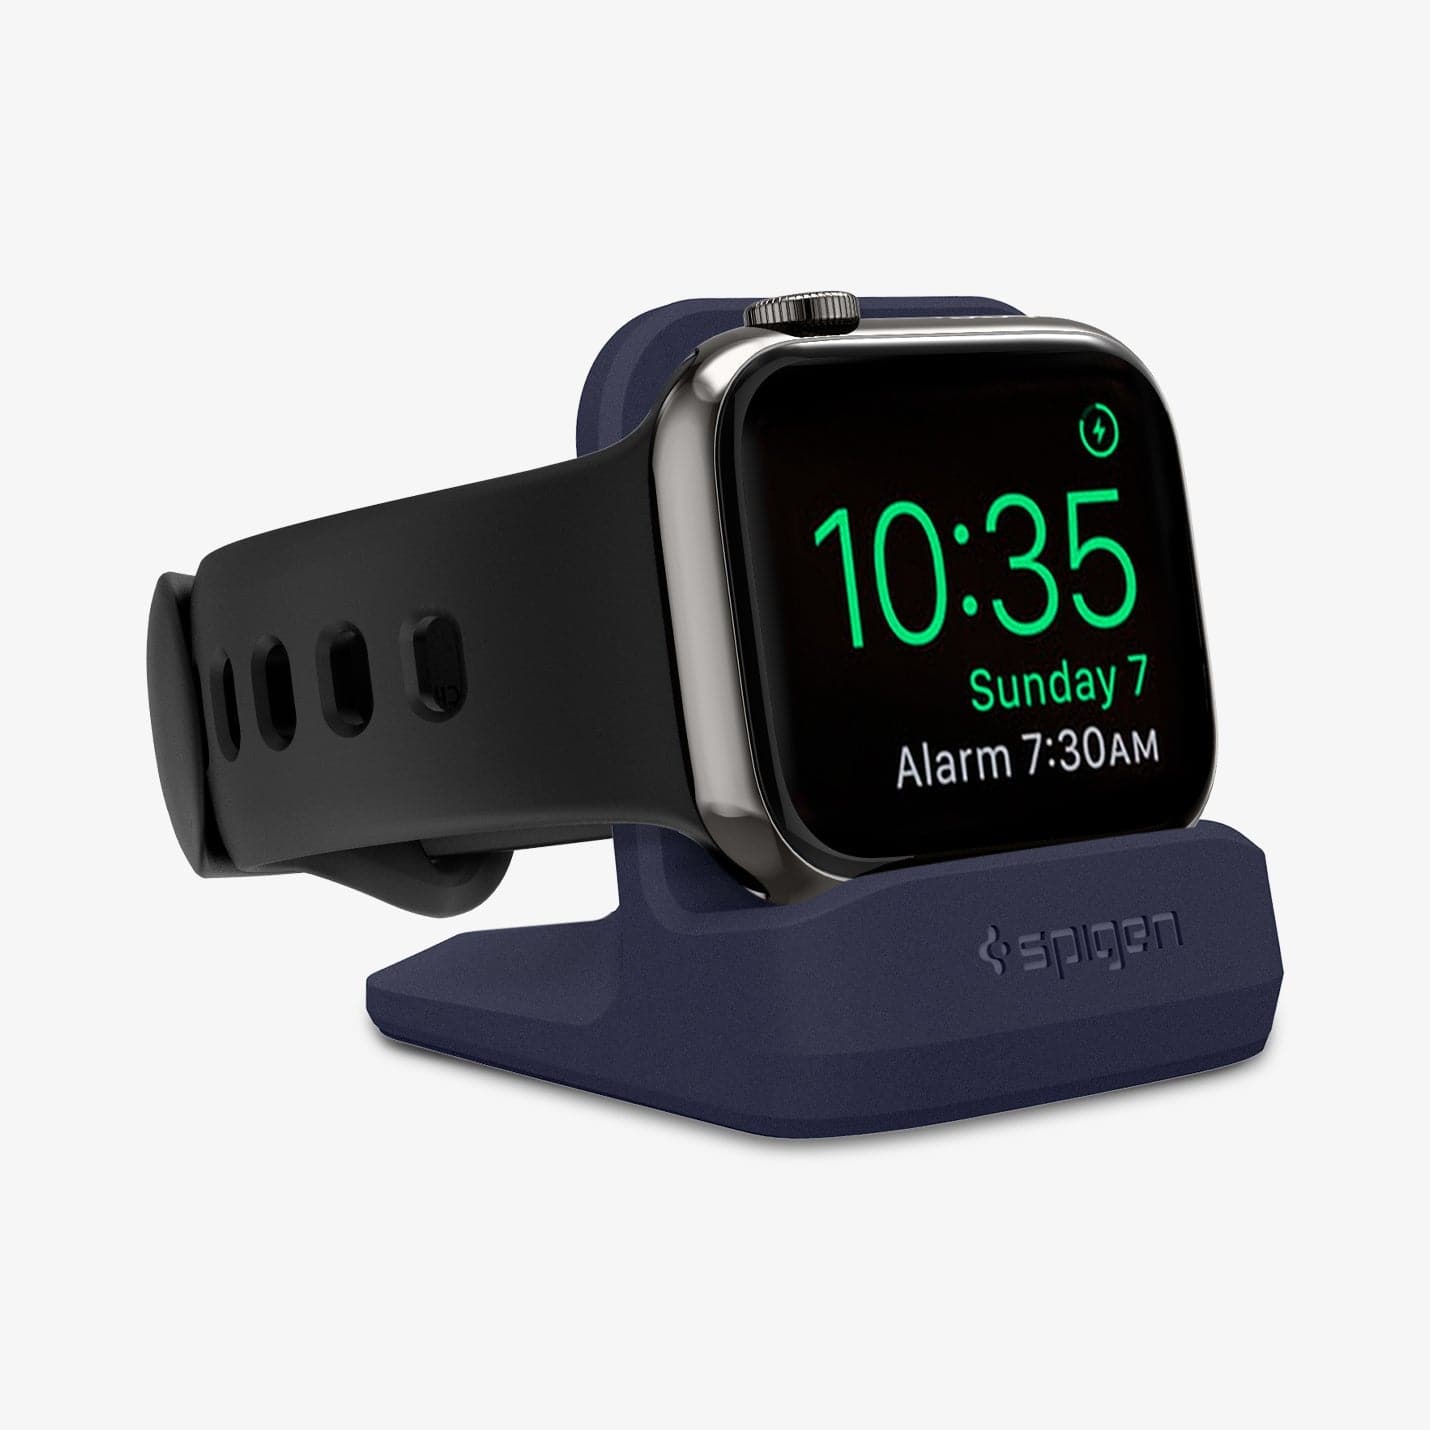 000CD21182 - Apple Watch Night Stand S350 in midnight blue showing the front and partial side with watch on stand